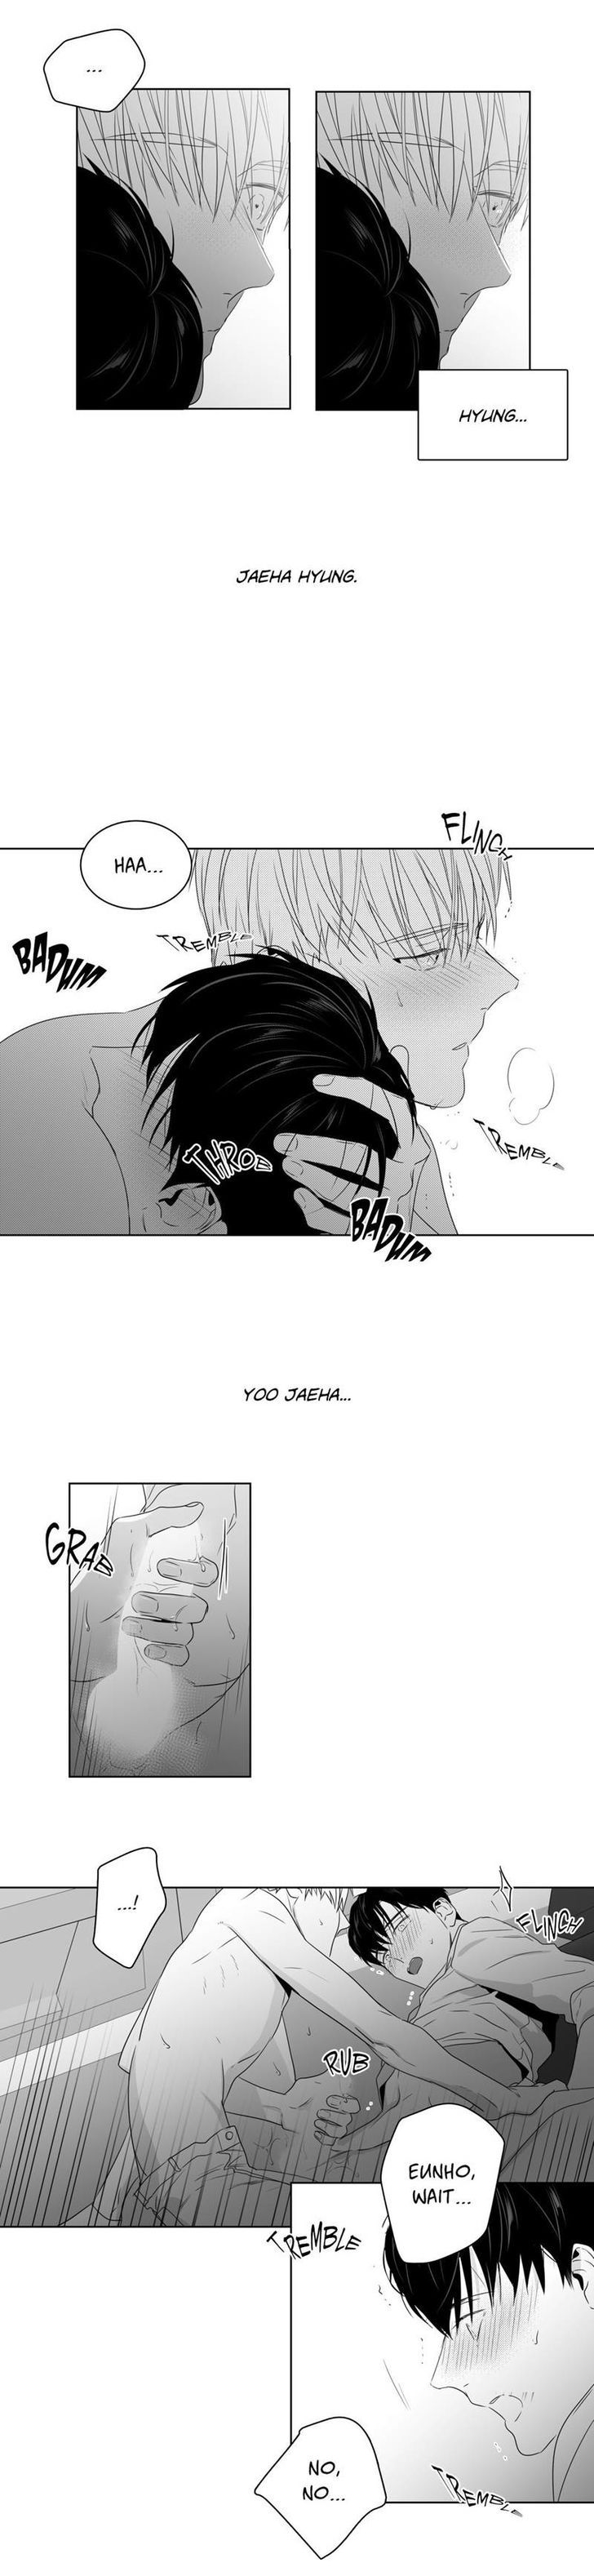 Lover Boy (Lezhin) Chapter 040 page 7